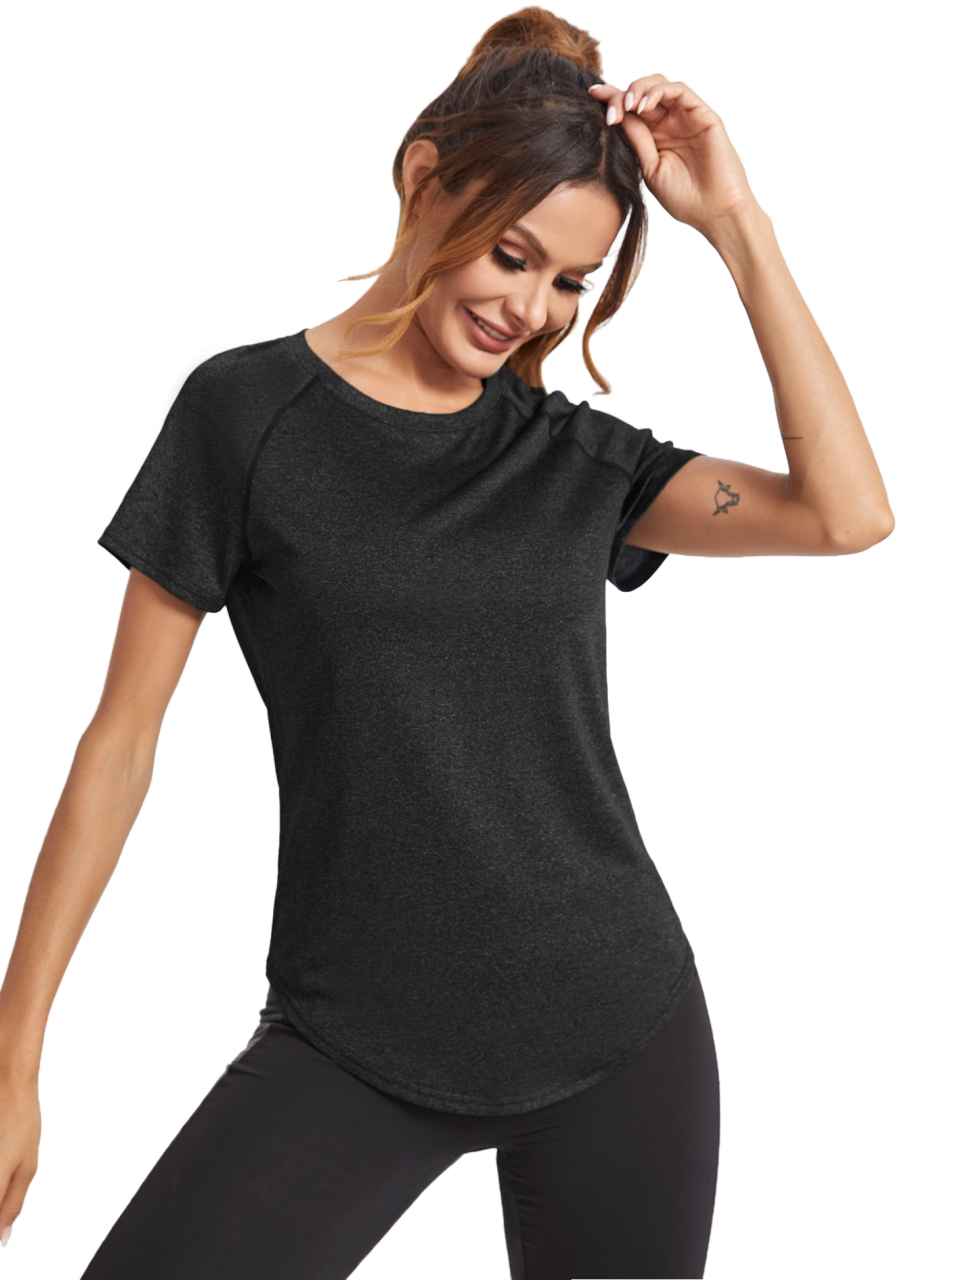 Back Inverted Triangle Stitching Curved Pendulum Quick-Drying T-Shirt Women